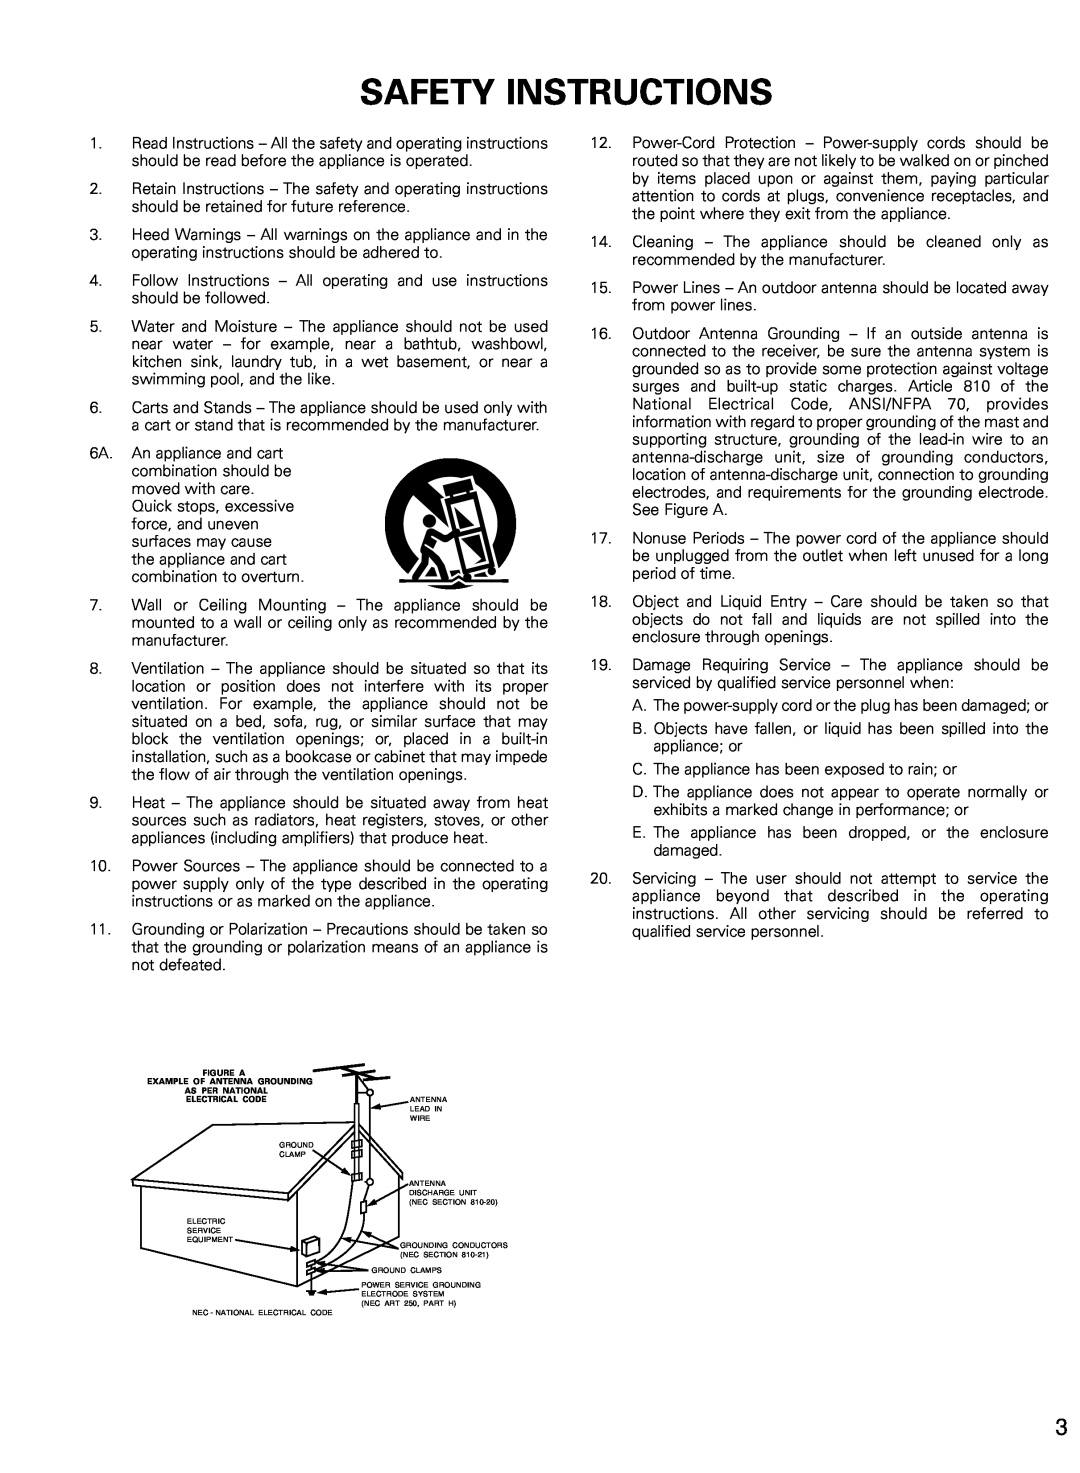 Denon AVR-2802/982 operating instructions Safety Instructions 